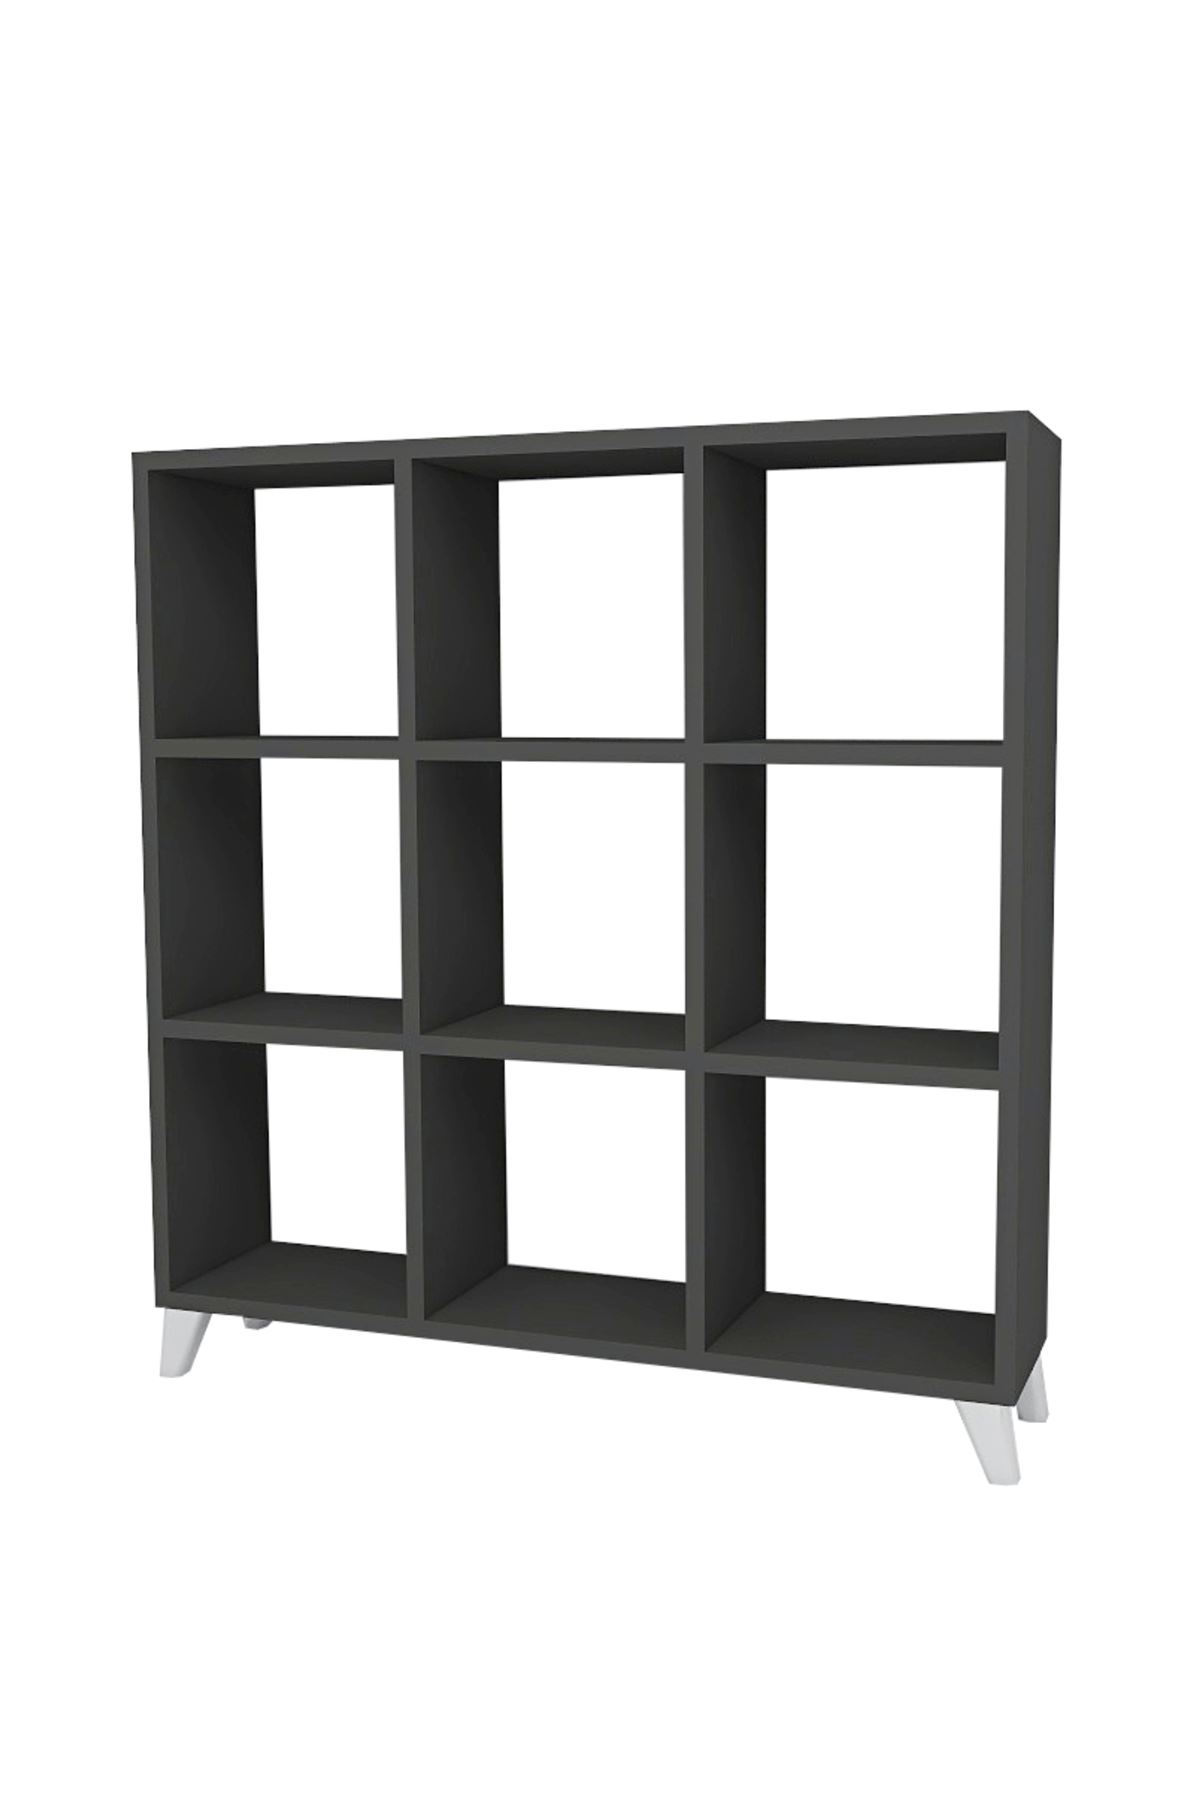 Bofigo Cube Bookshelf with 9 Sections and Shelves Square Bookcase Library Anthracite